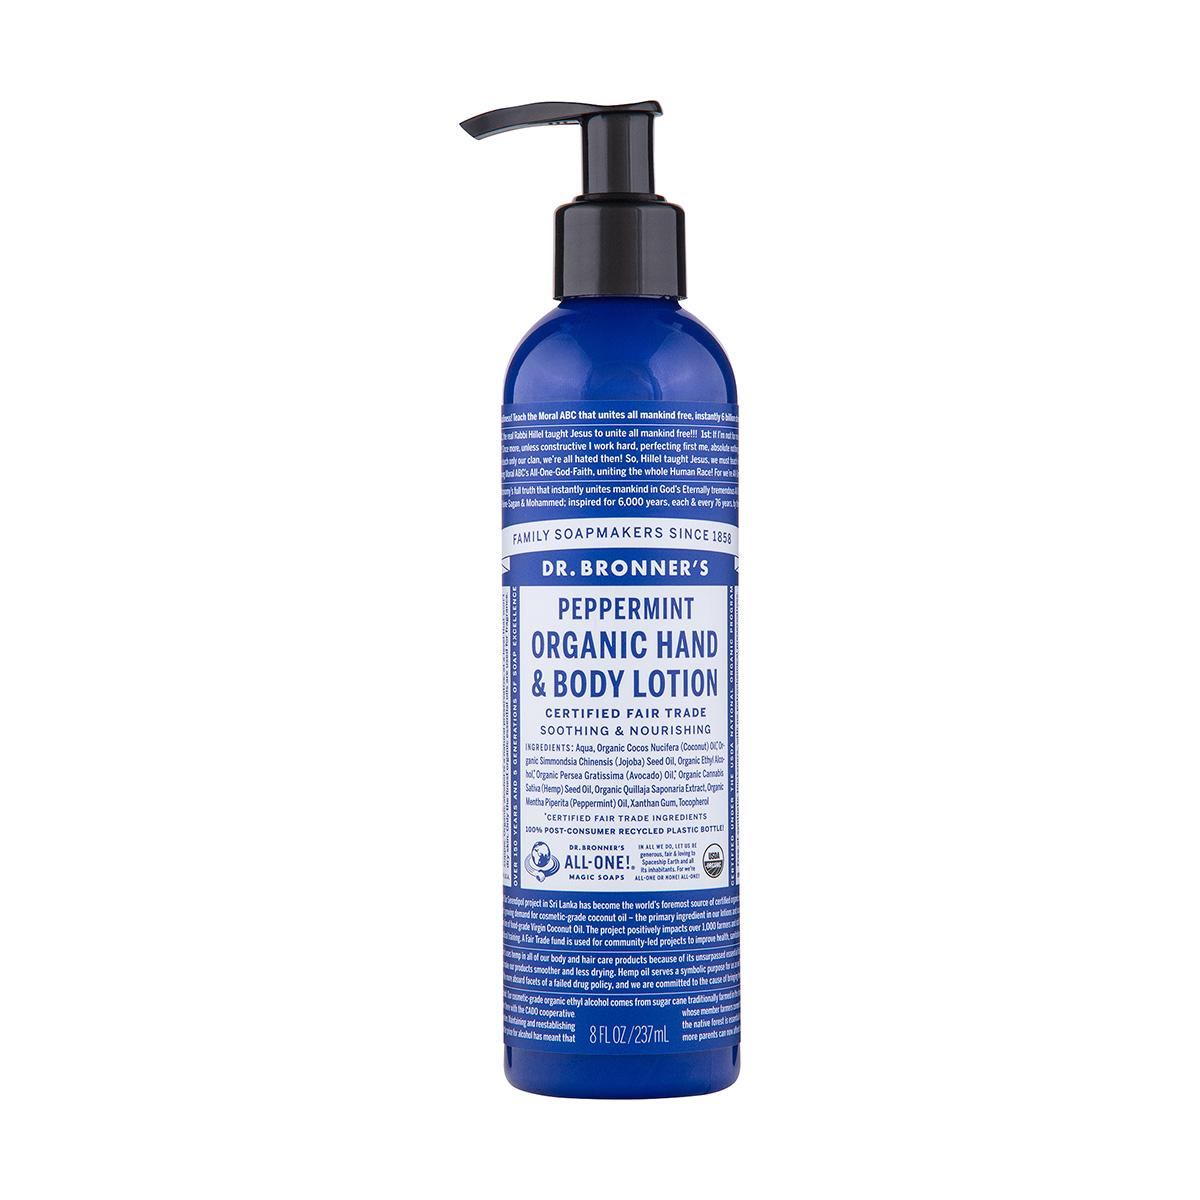  Dr.Bronner's Organic Hand & Body Lotion - Peppermint